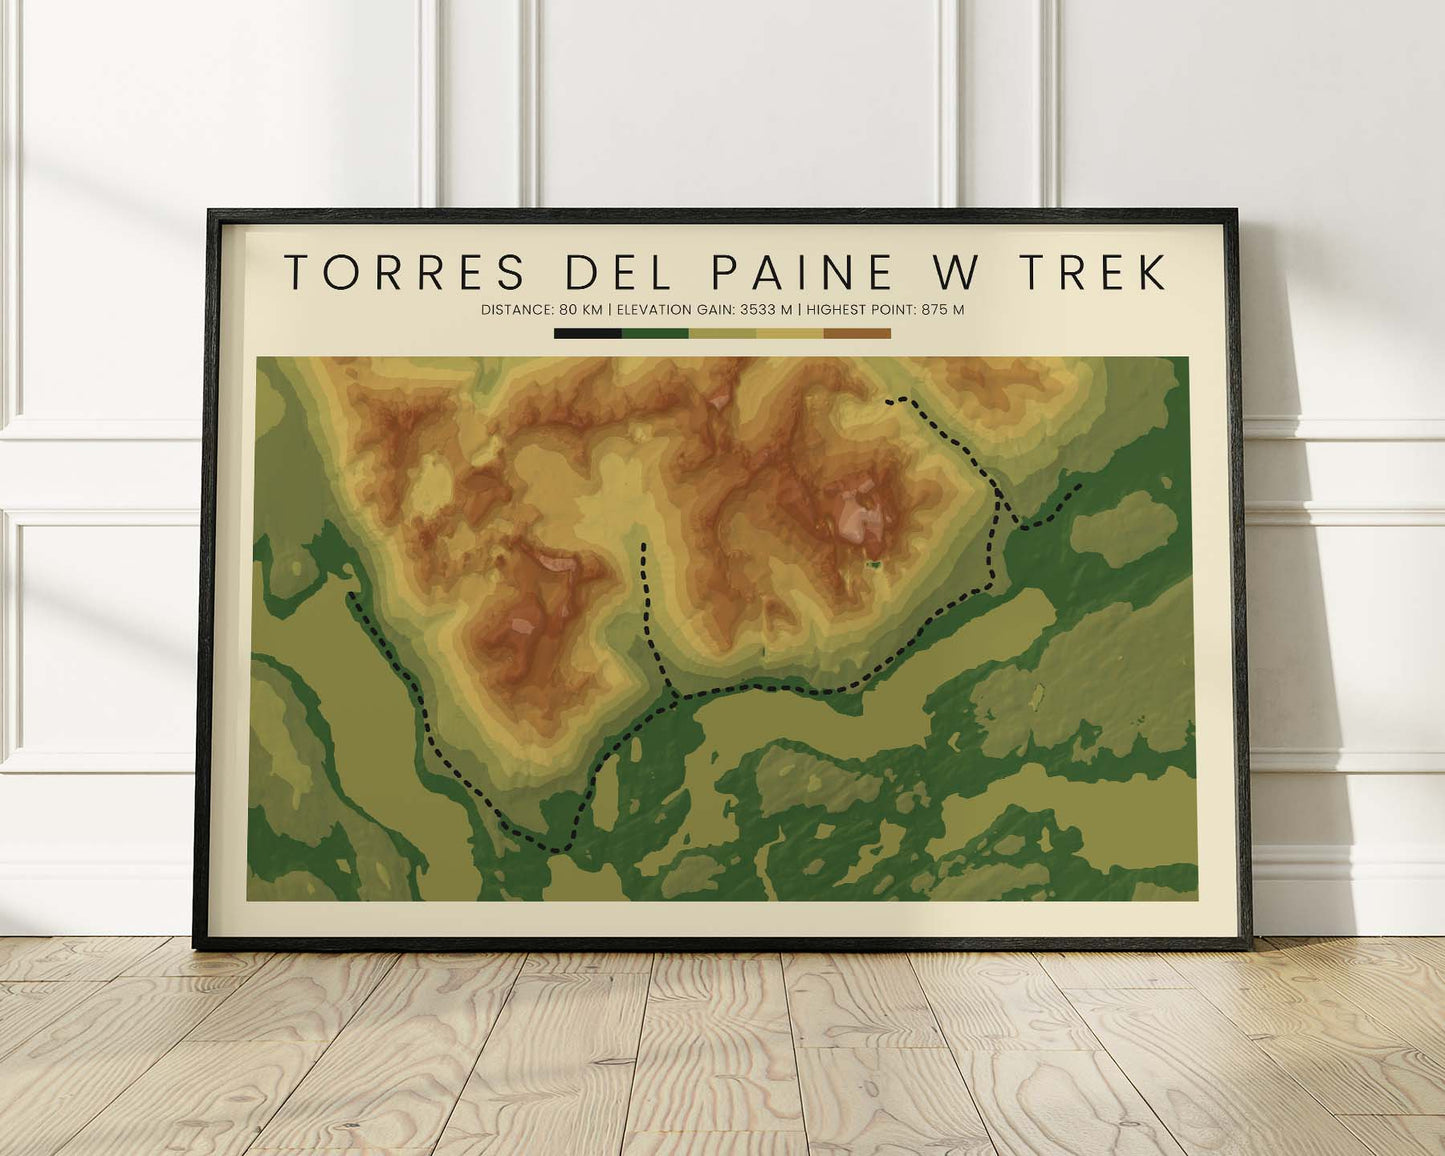 W Trek Patagonia (Andes) Trail Print with Realistic Green Background